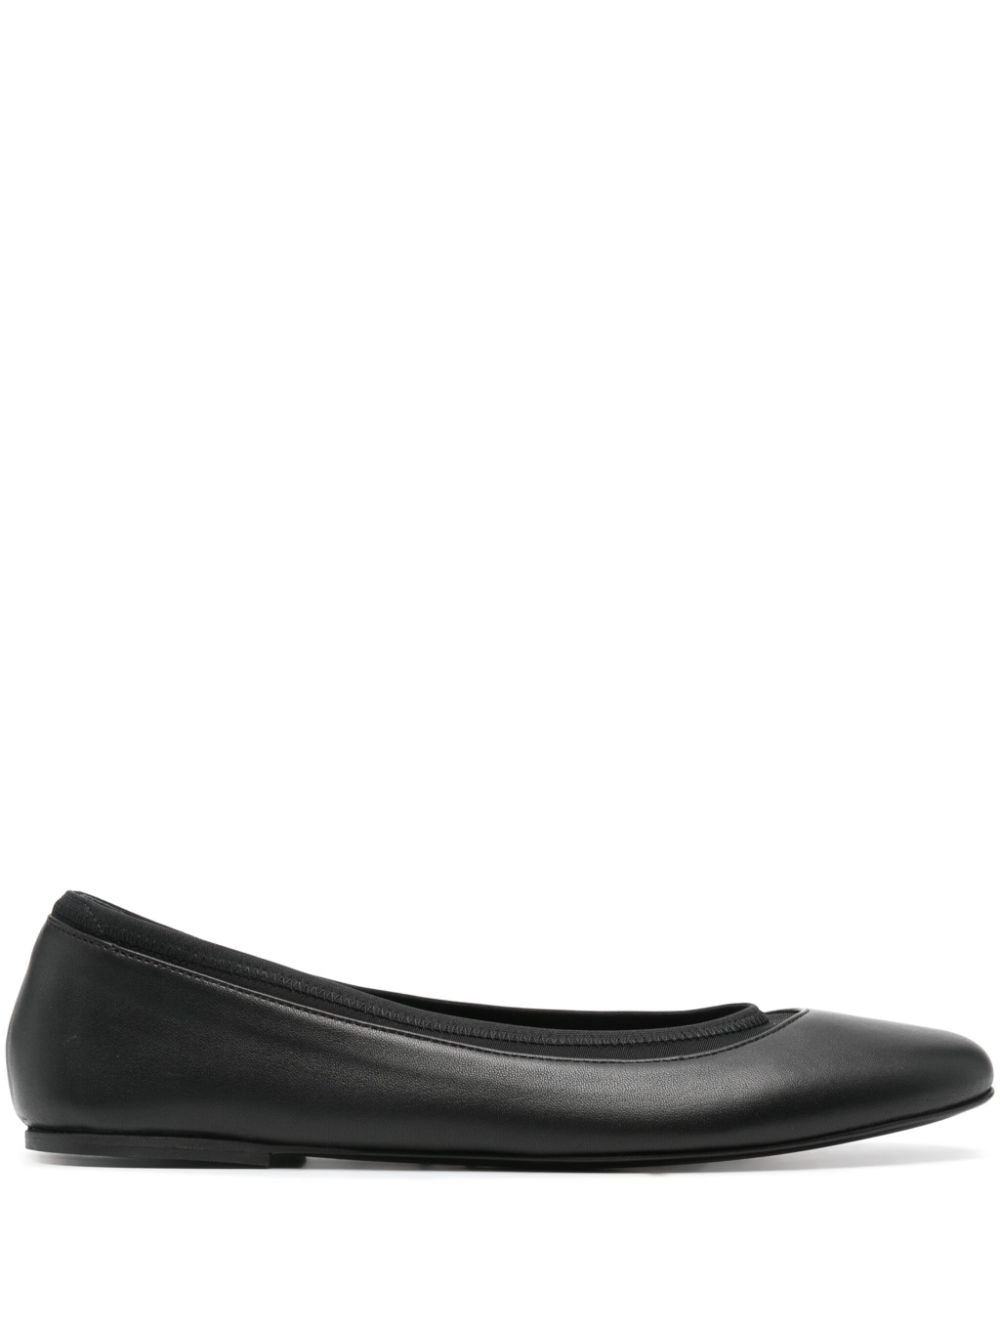 Shop Loulou Studio Rupa Leather Ballerina Shoes In Black